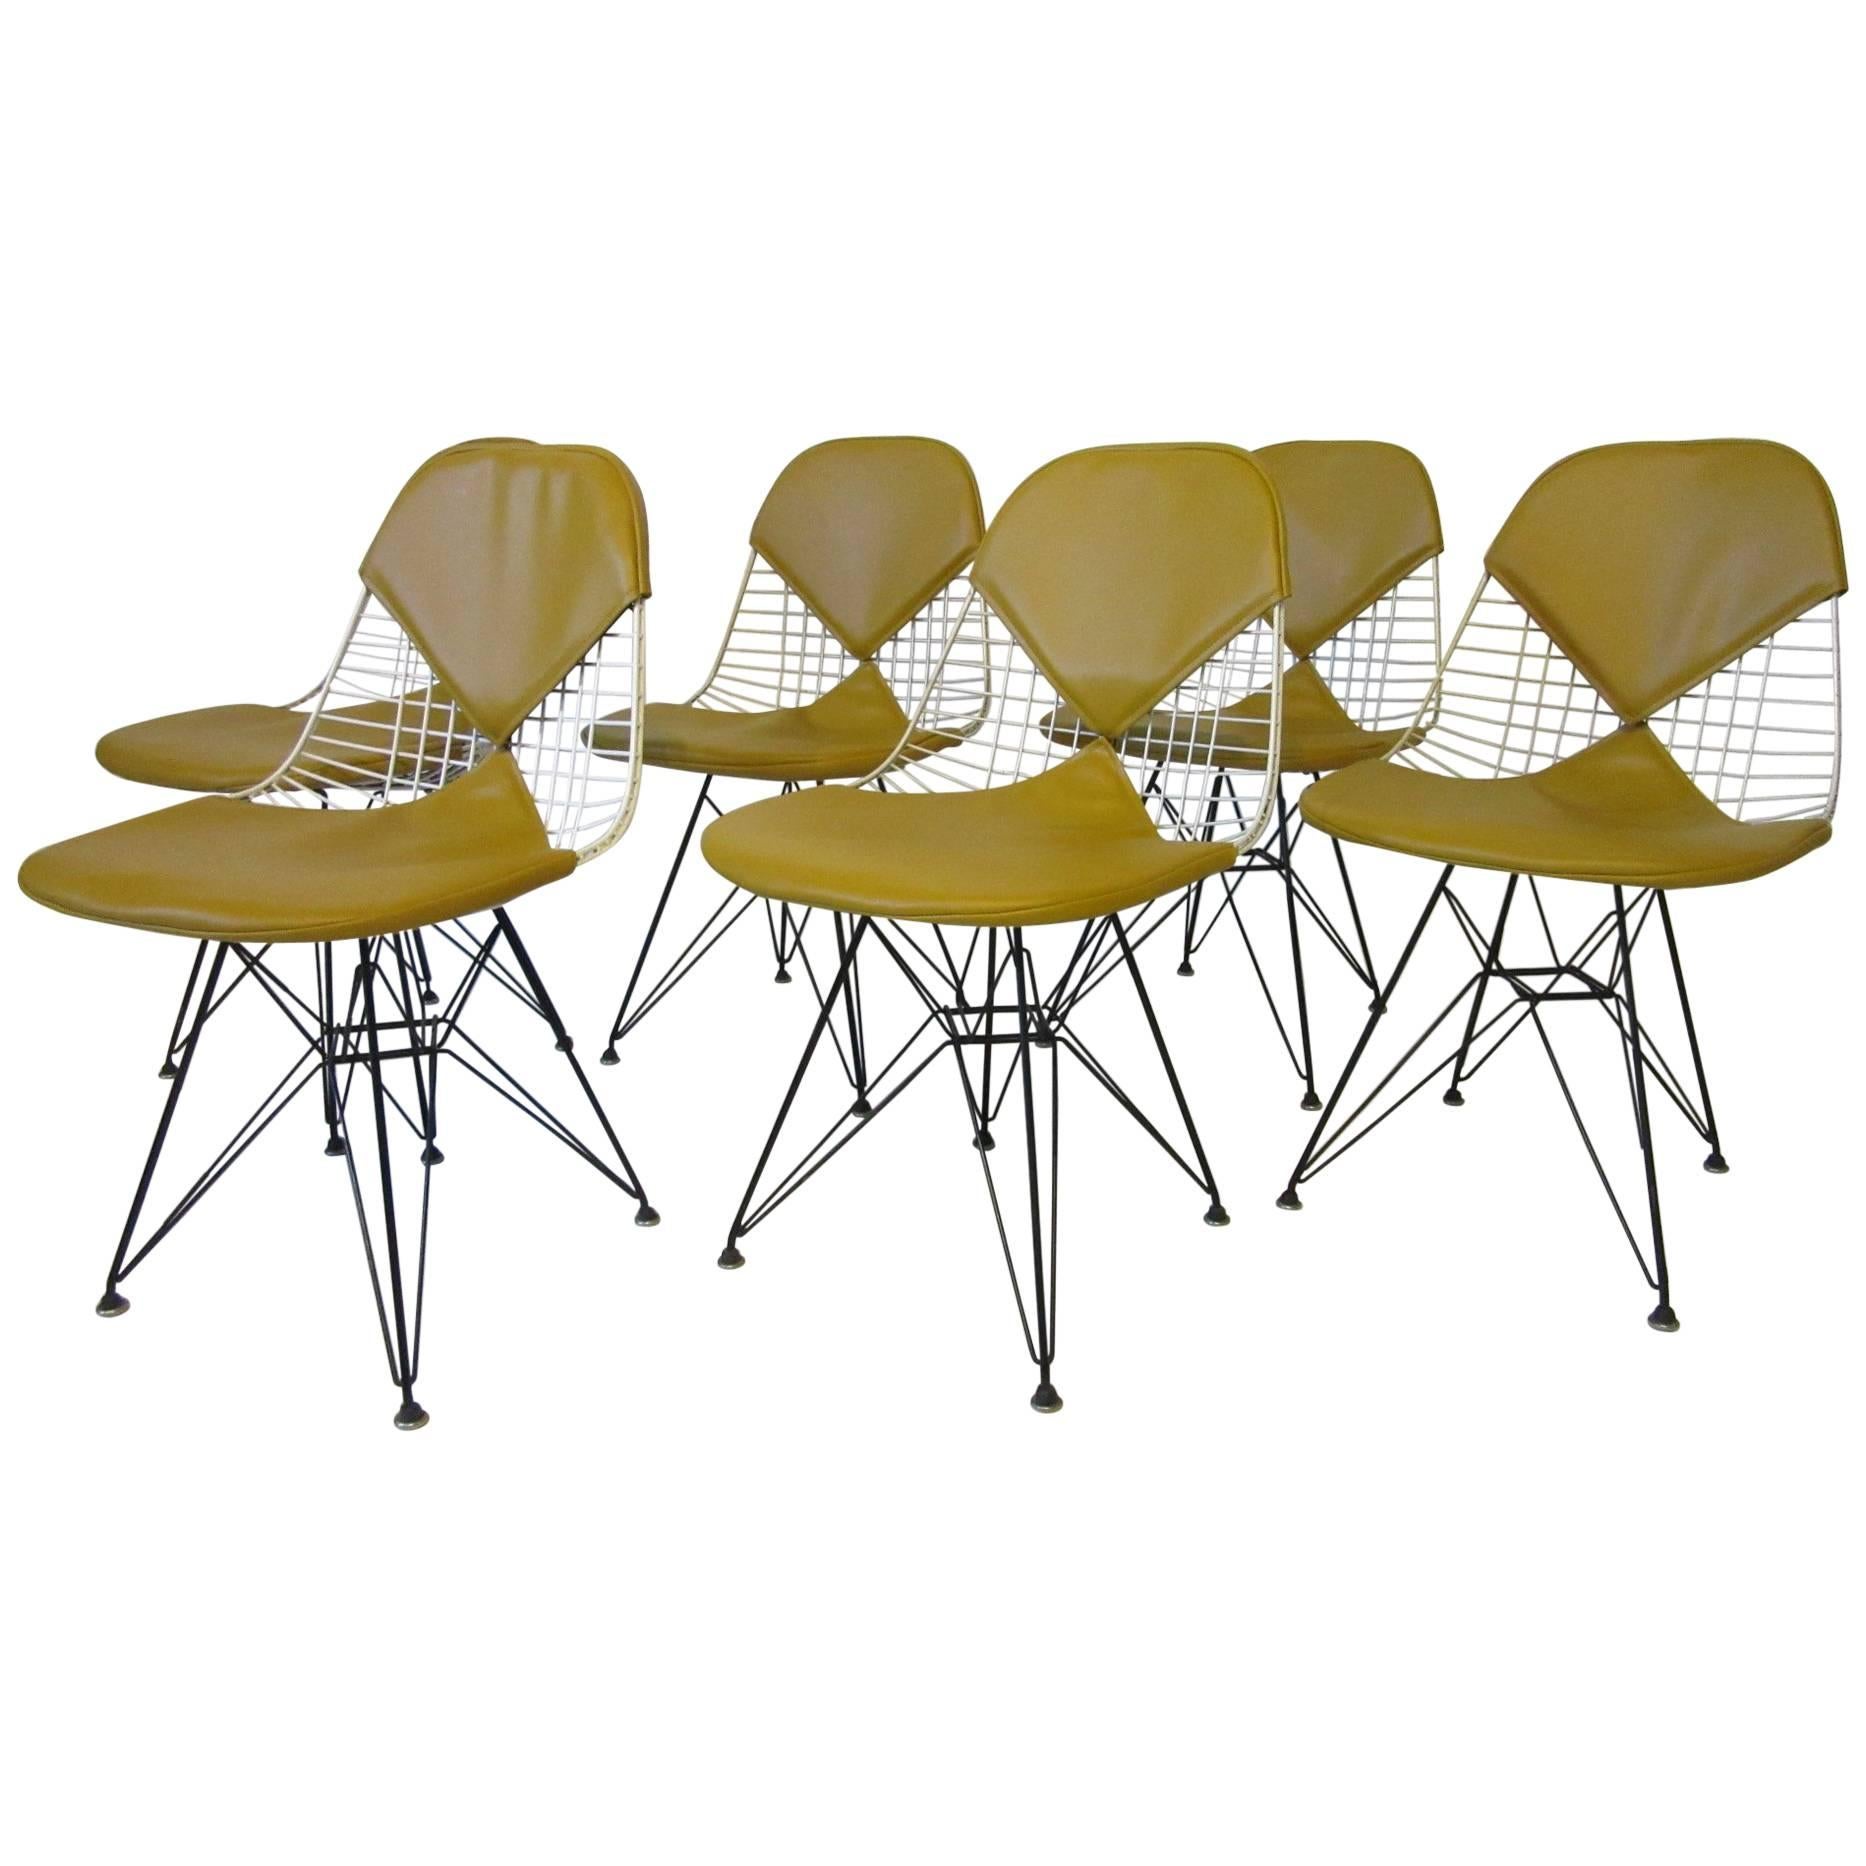 Eames Herman Miller Wire and Upholstered Eiffel Tower Dining Chairs